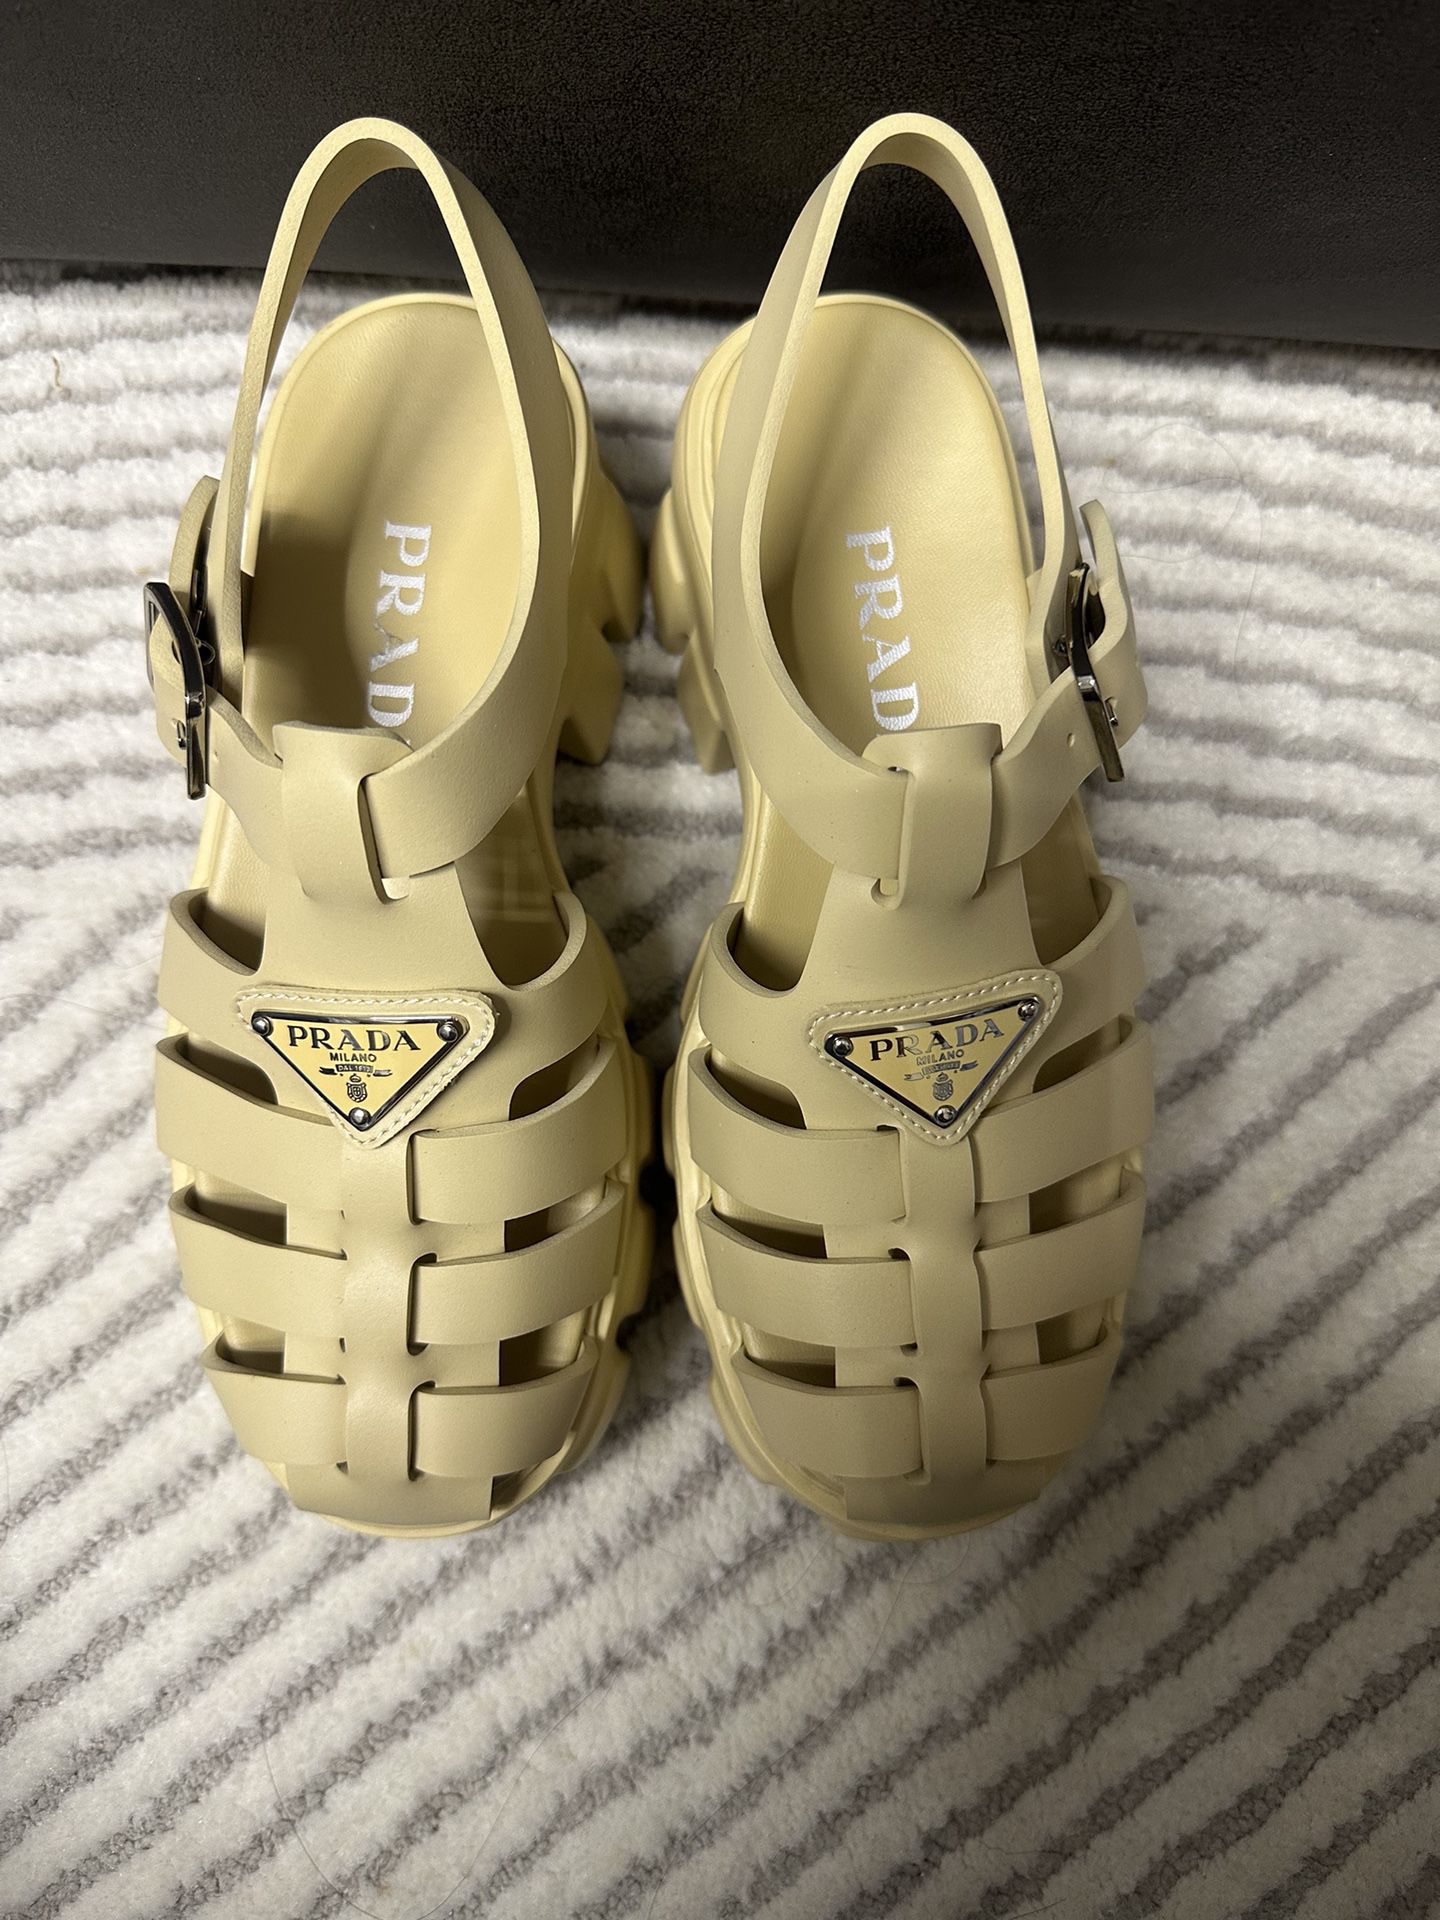 Louis Vuitton Chunky Heel Sandals for Sale in Hollywood, FL - OfferUp